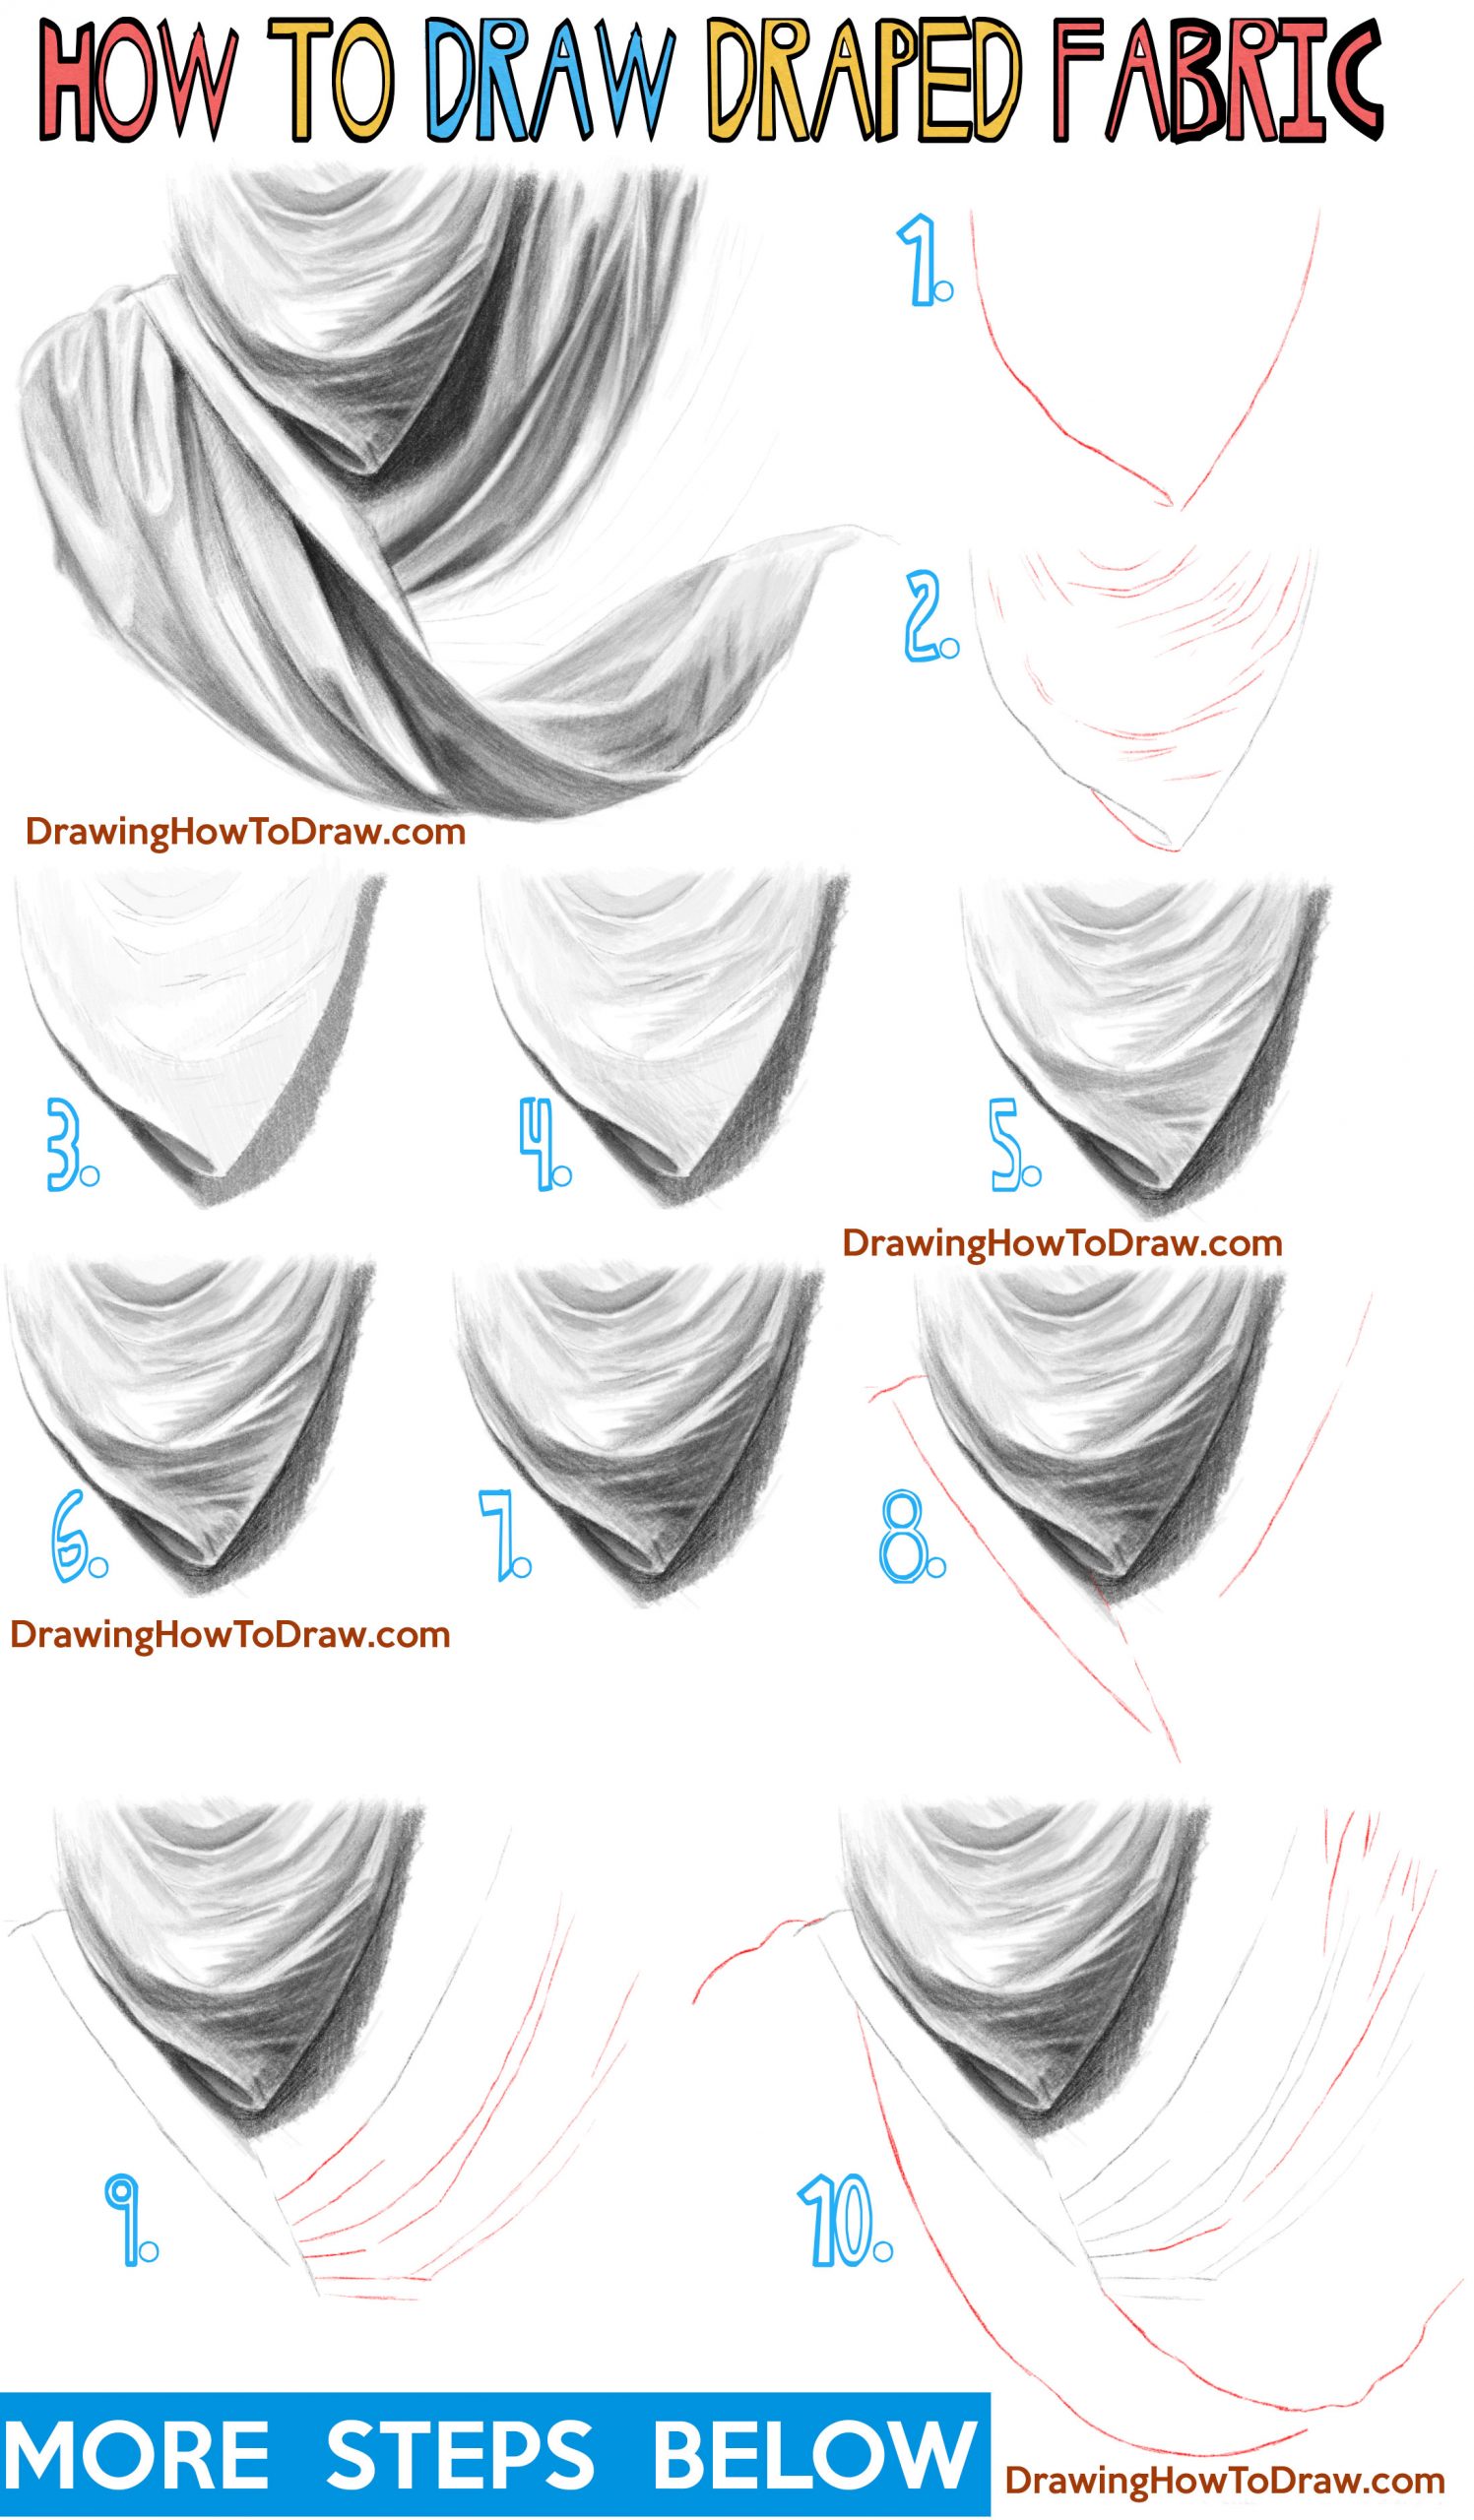 How to Draw Draped Fabric with Creased Folds, Wrinkles on Clothing Fabric and Drapery